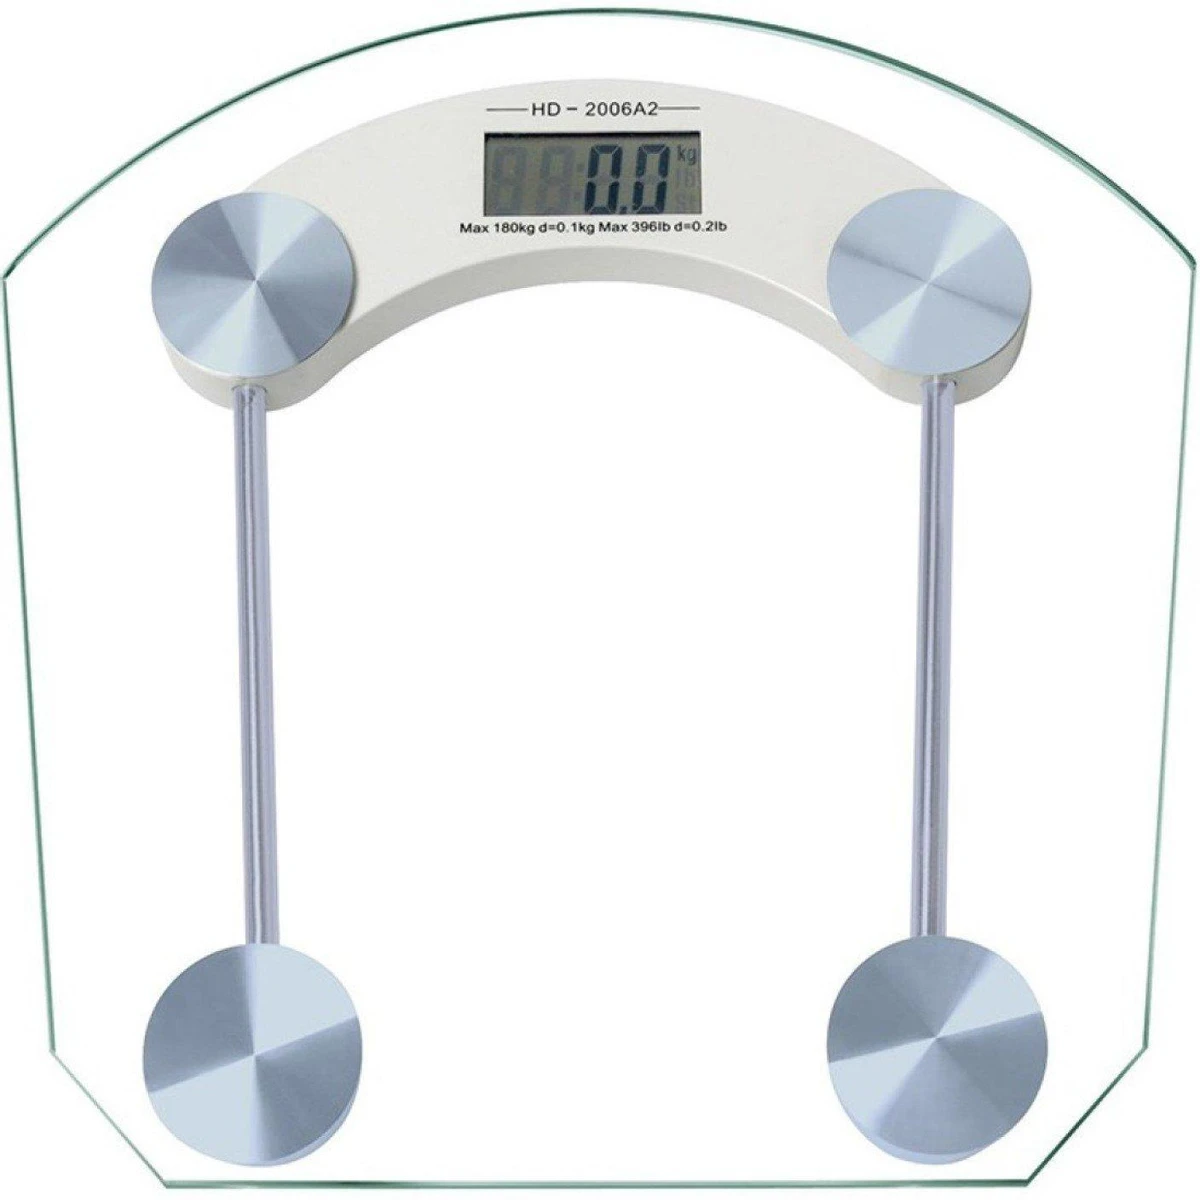 Personal Weight Machine Human Body Digital Weighing Scale (TRANSPARENT)